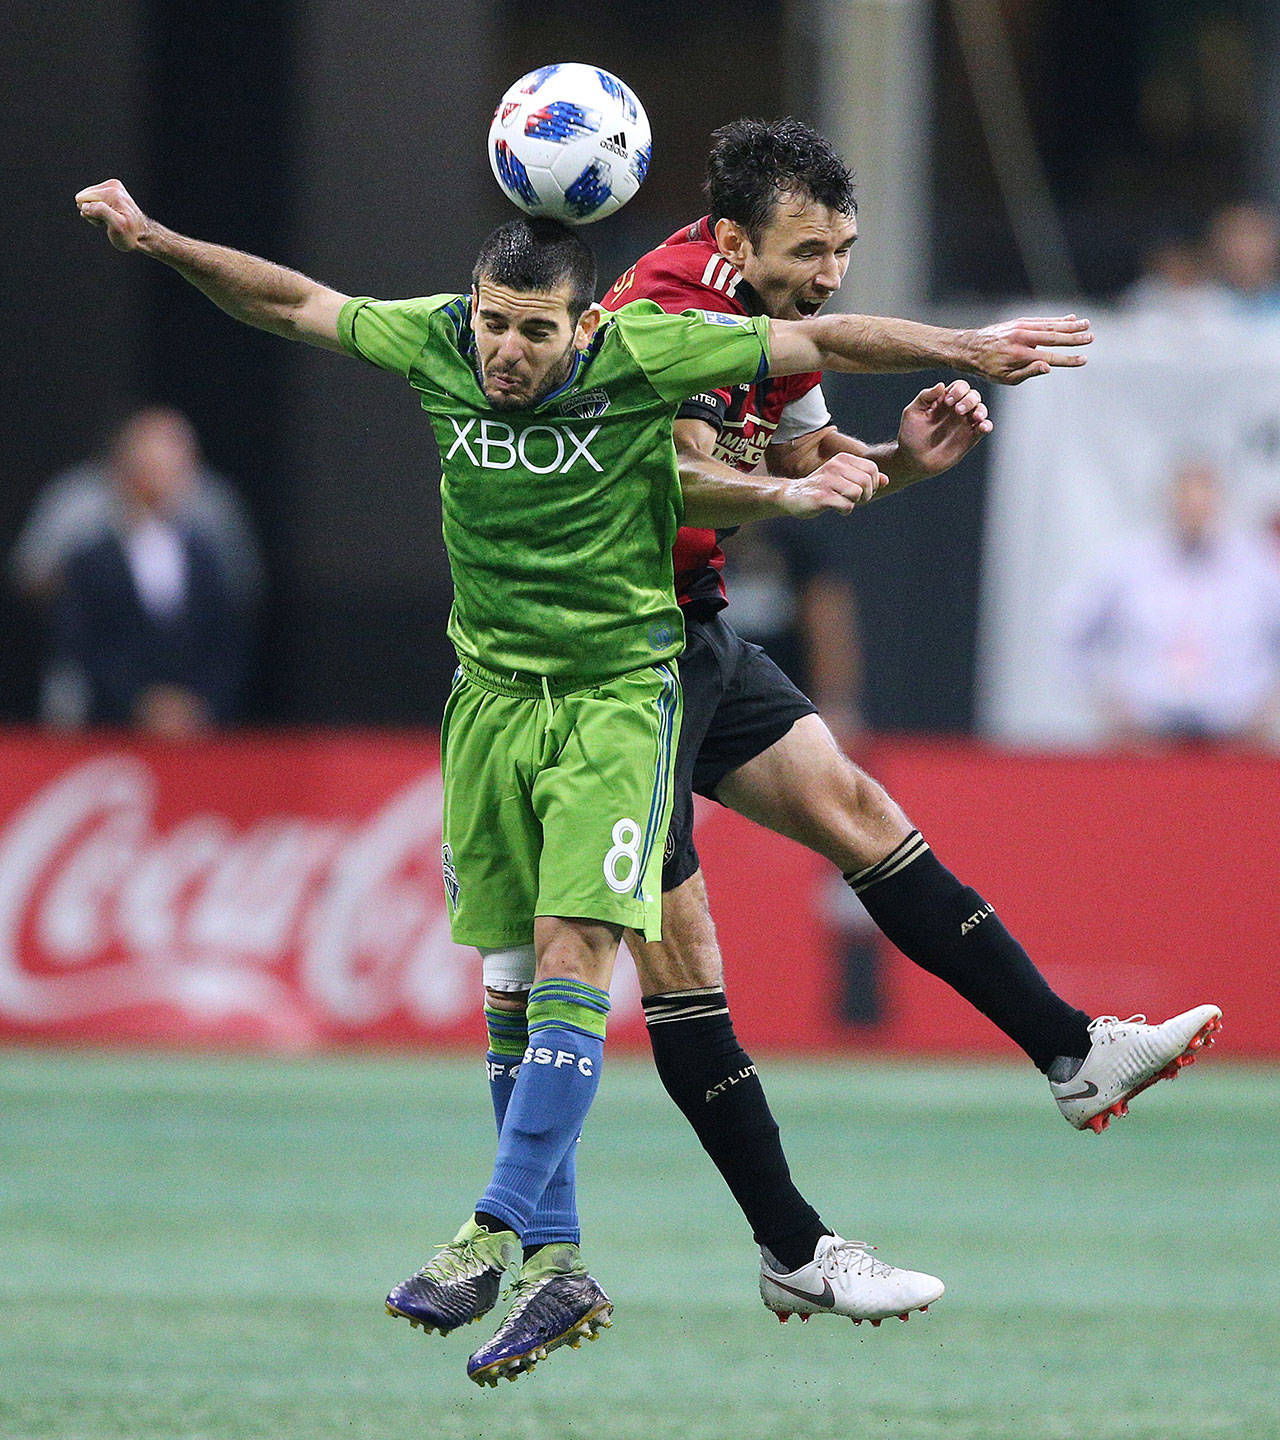 Seattle Sounders midfielder Victor Rodriguez and Atlanta United defender Michael Parkhurst collide on a header during the second half on Sunday, July 15, 2018, in Atlanta, Ga. (Curtis Compton/Atlanta Journal-Constitution/TNS)